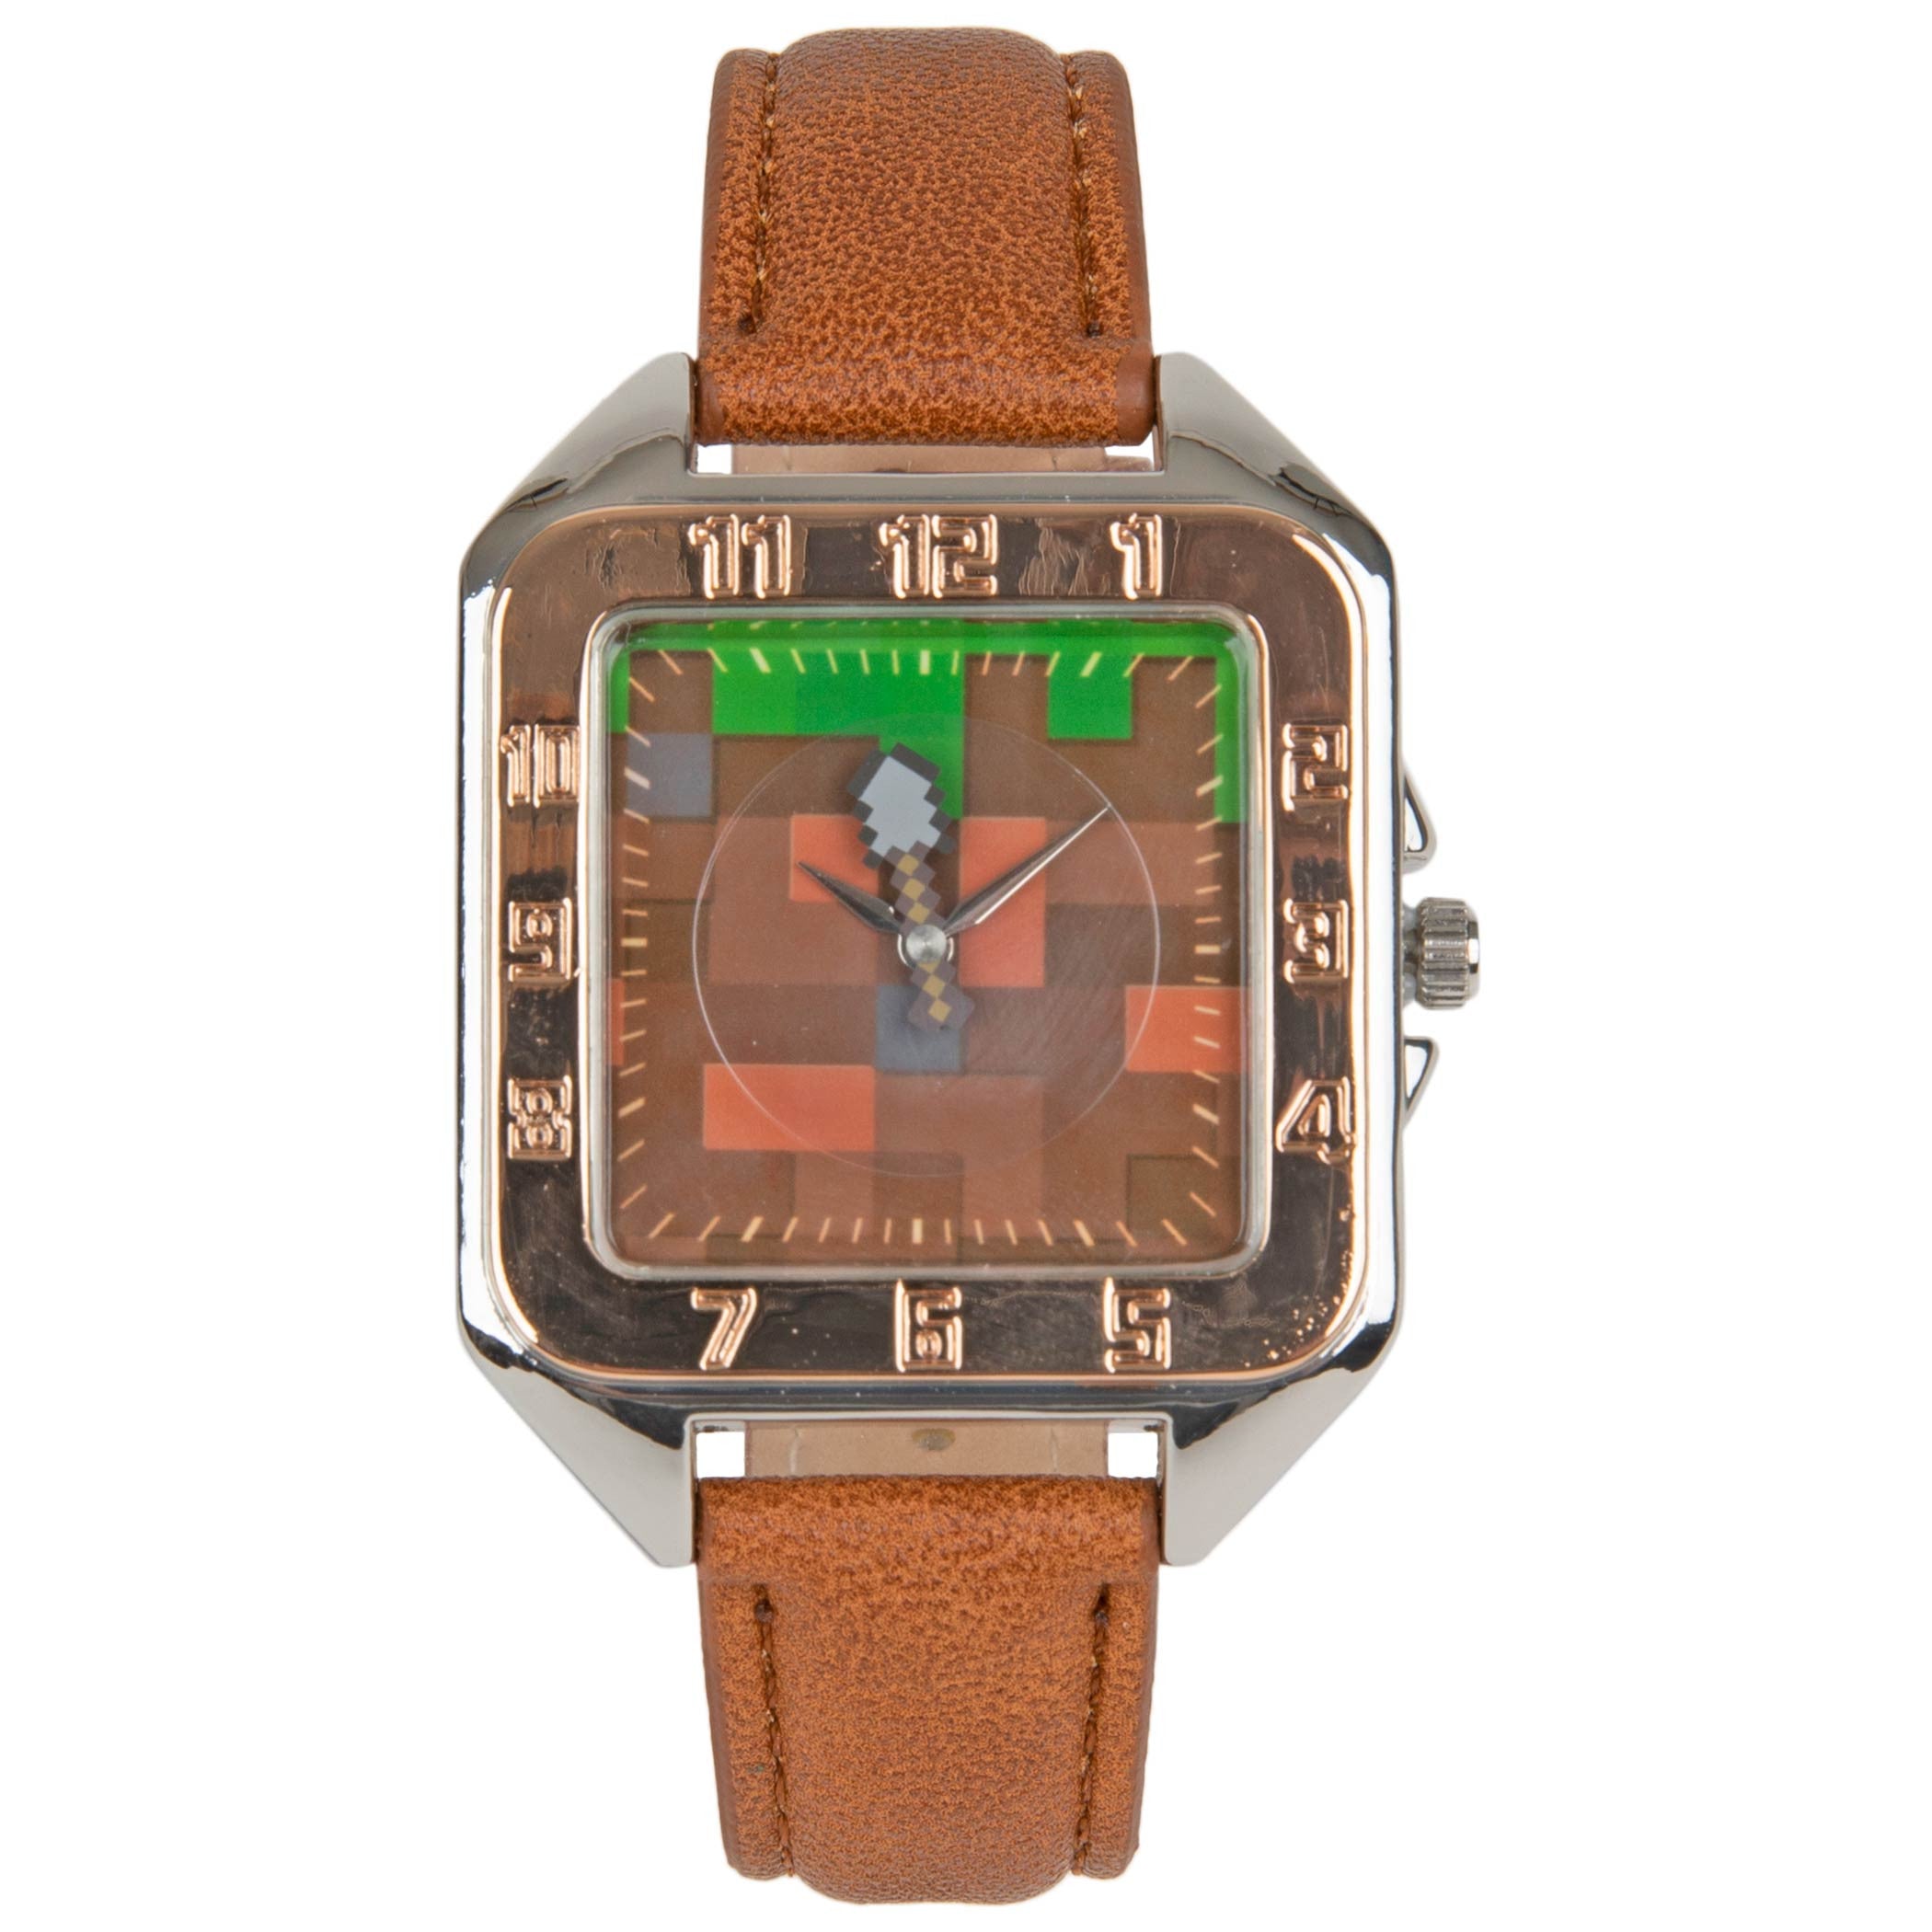 Minecraft Earth Block Watch Face with Faux Leather Wrist Band